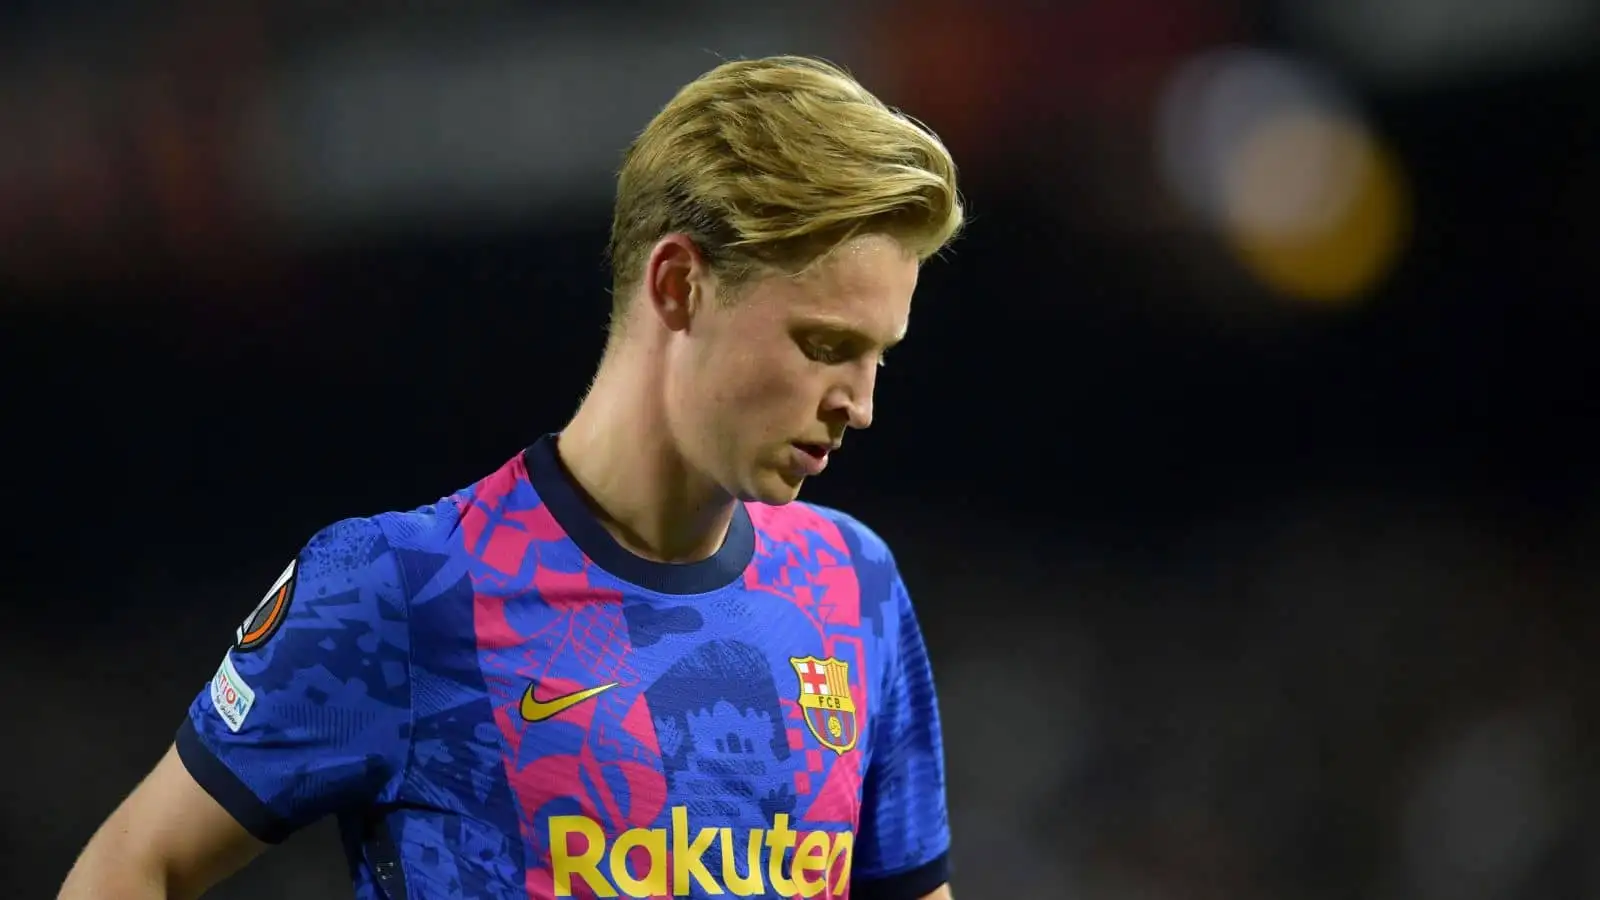 Frenkie de Jong (21) of FC Barcelona during the Europa League match between FC Barcelona and SSC Napoli at Camp Nou Stadium